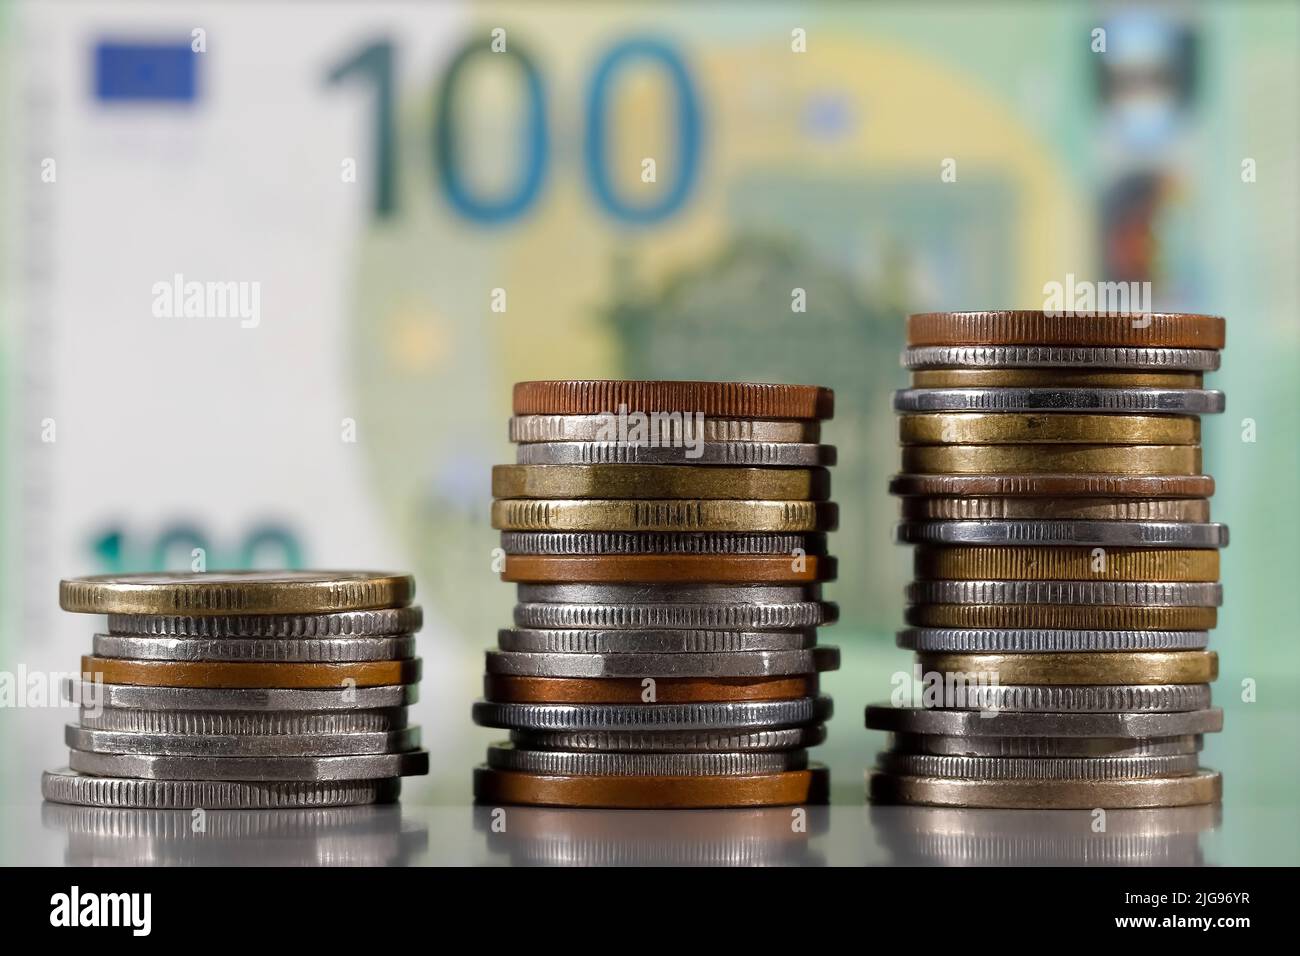 Here are stacked various coins and are shown against denomination of the euro banknote background. Stock Photo